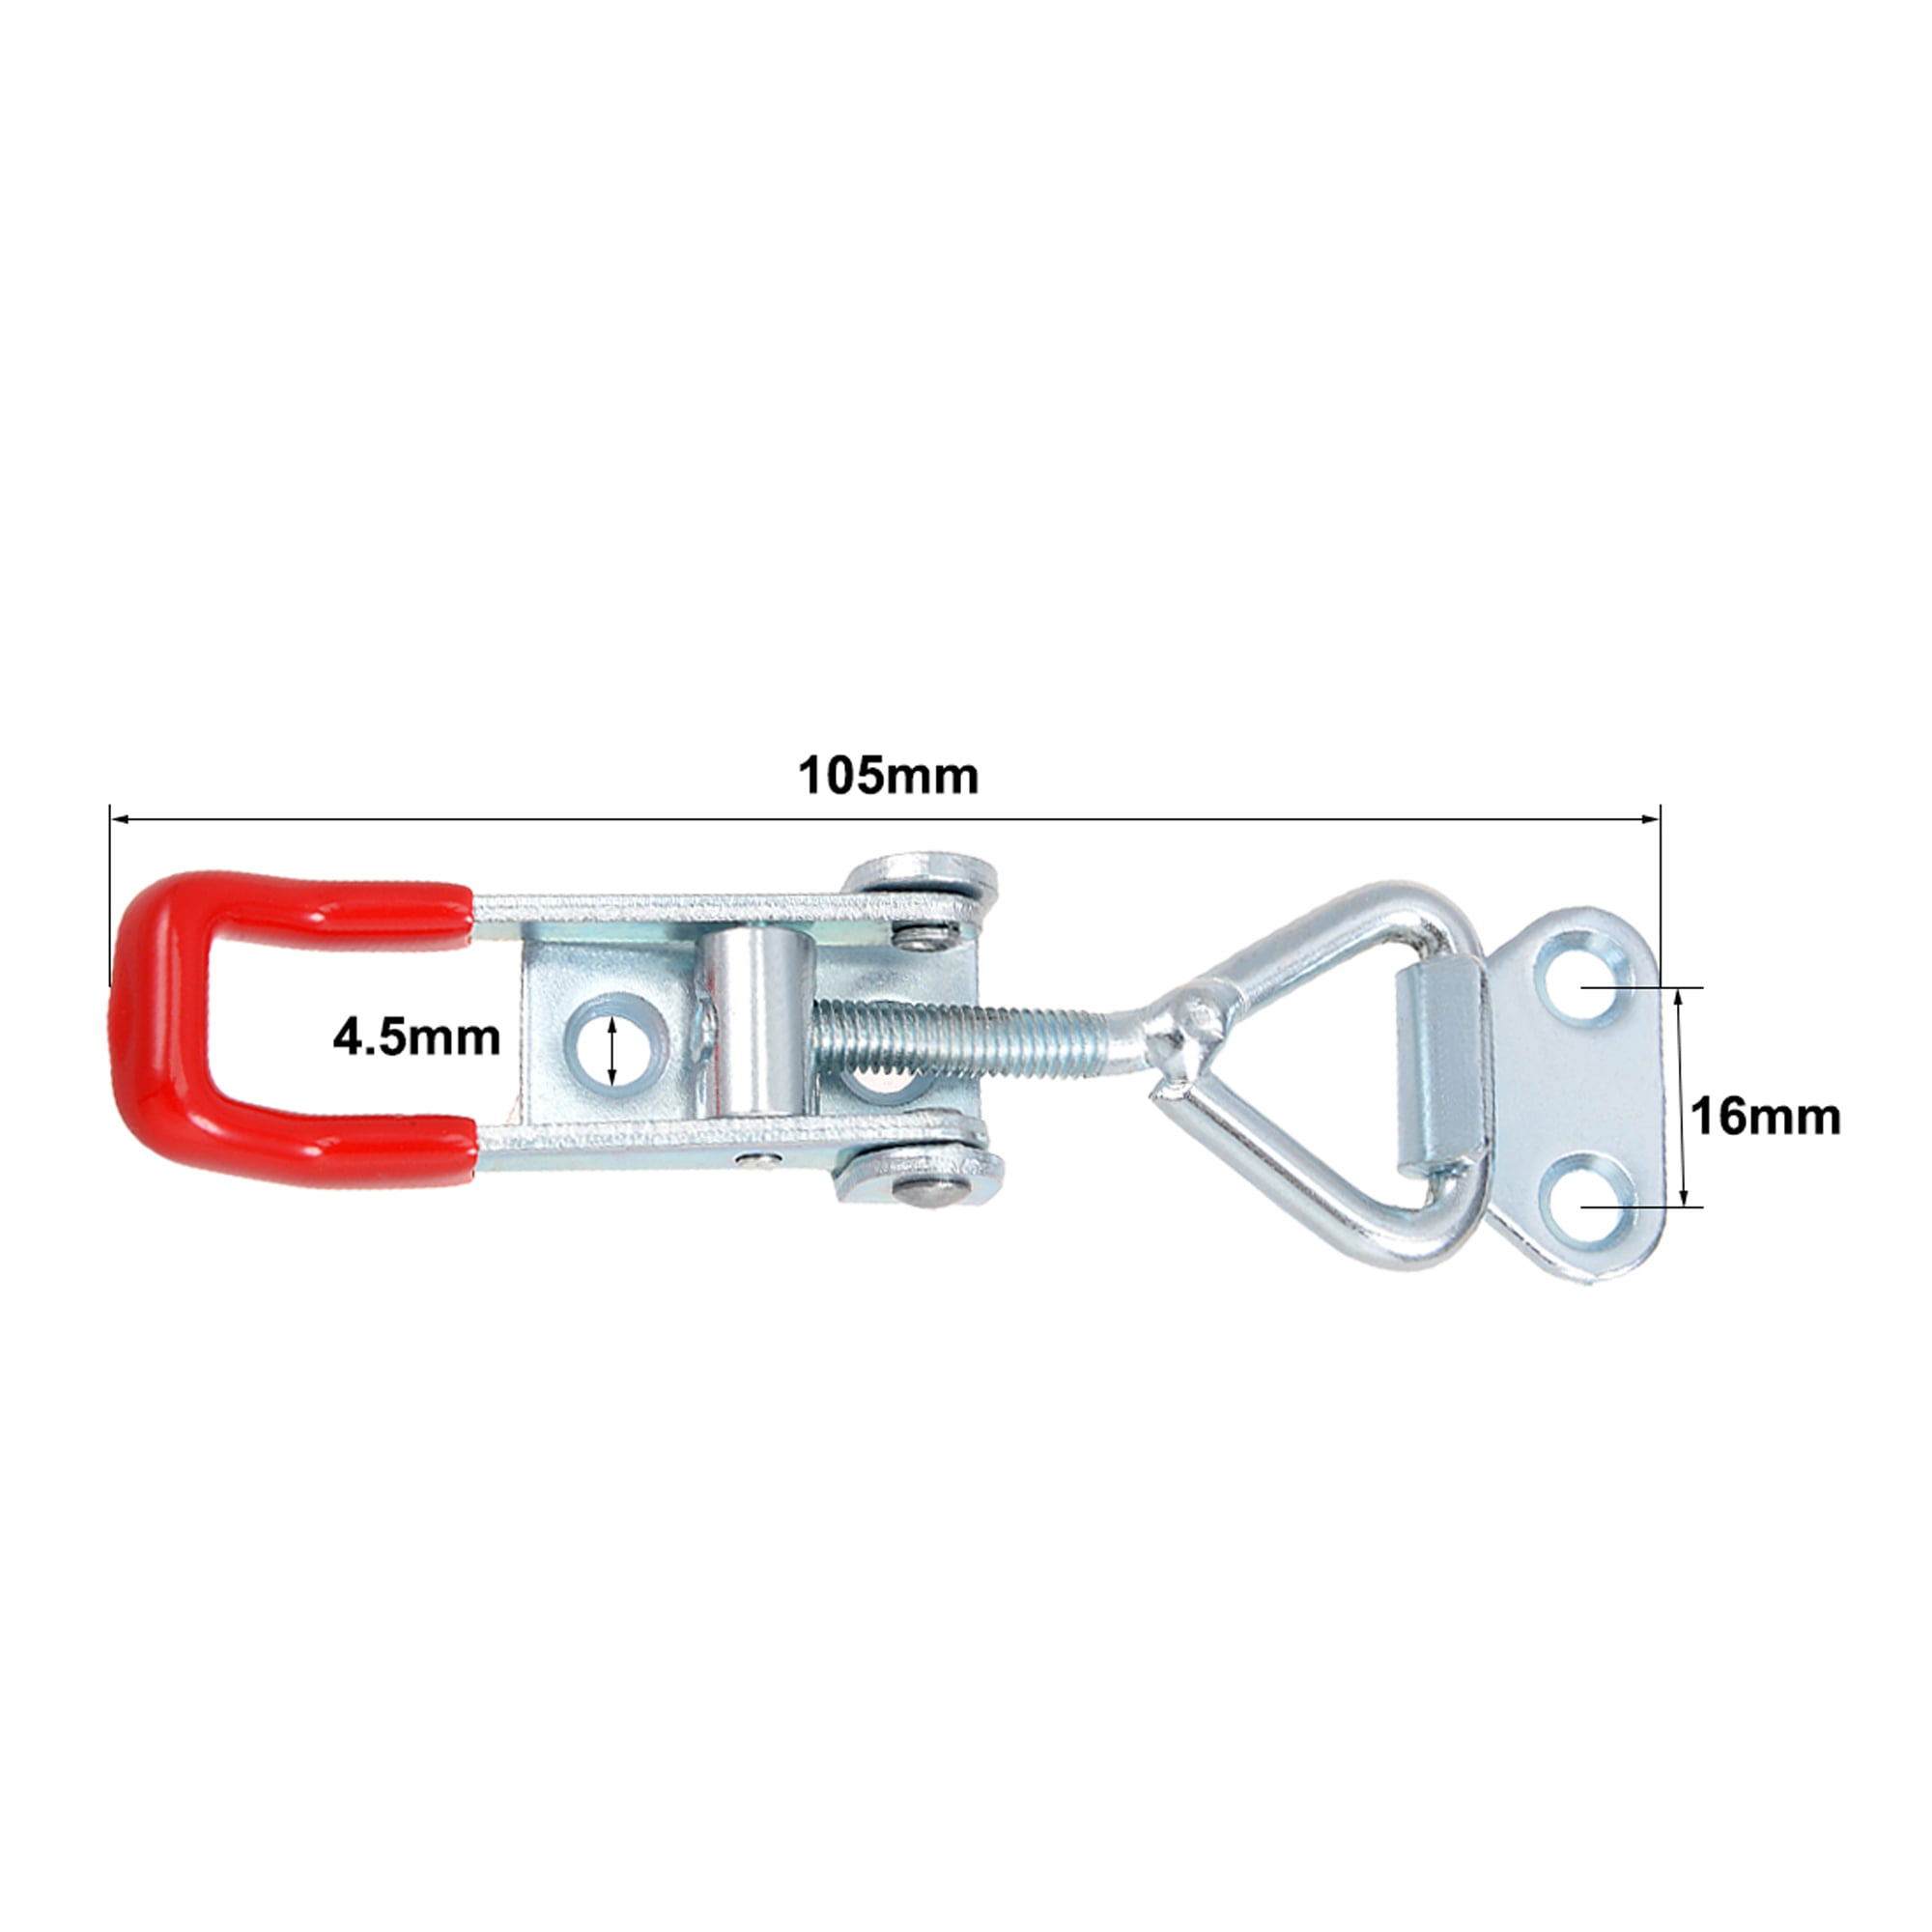 CUKAYO 2pcs Toggle Latch Clamp 4001, Adjustable 304 Stainless